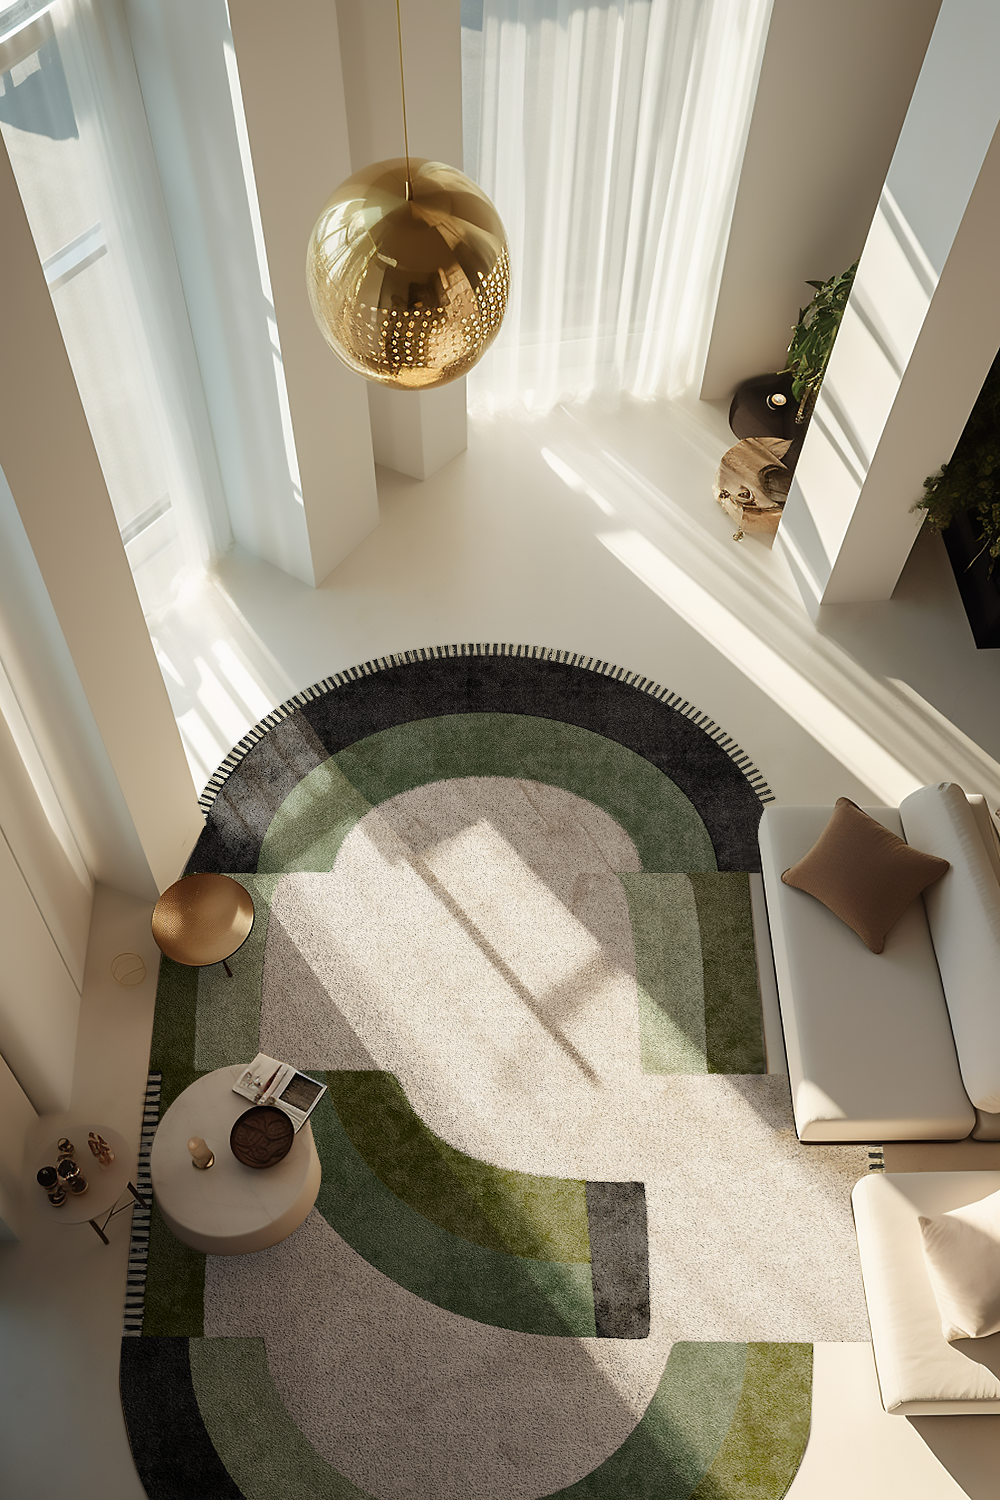 A minimalist space with green accents and TAPIS rug in the center.